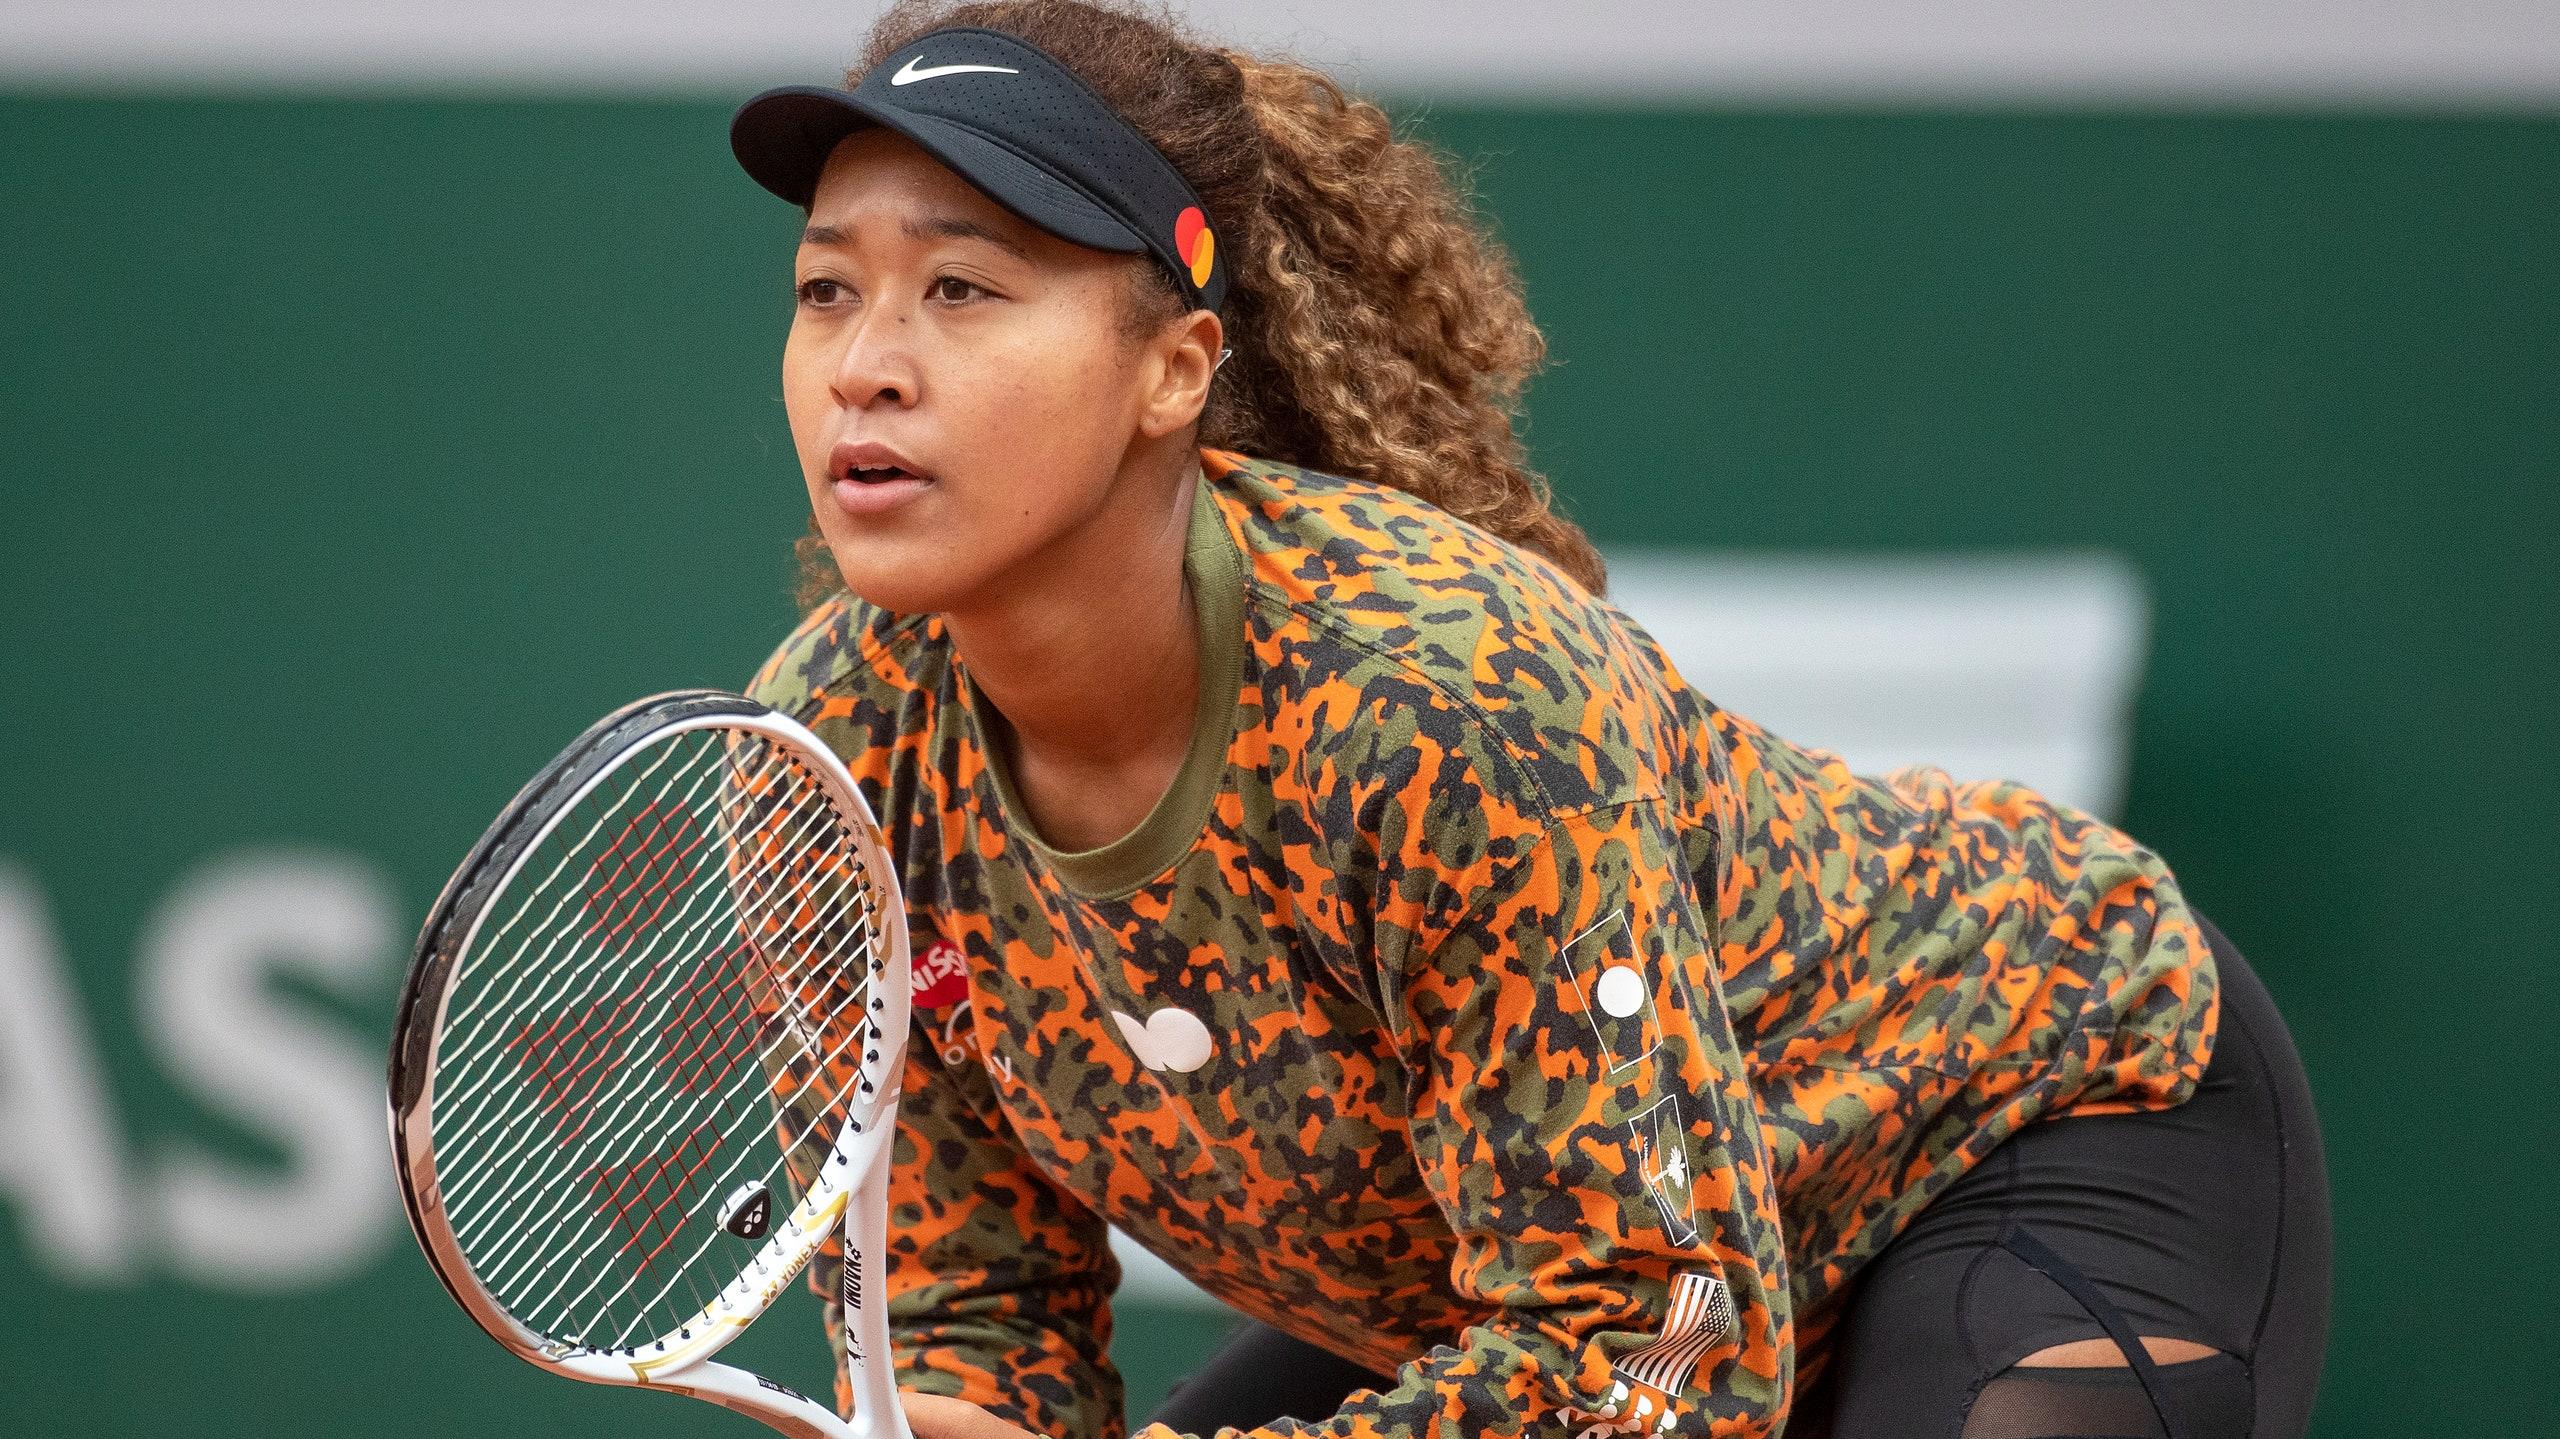 Naomi Osaka Addressed Crowd After Being Heckled At California